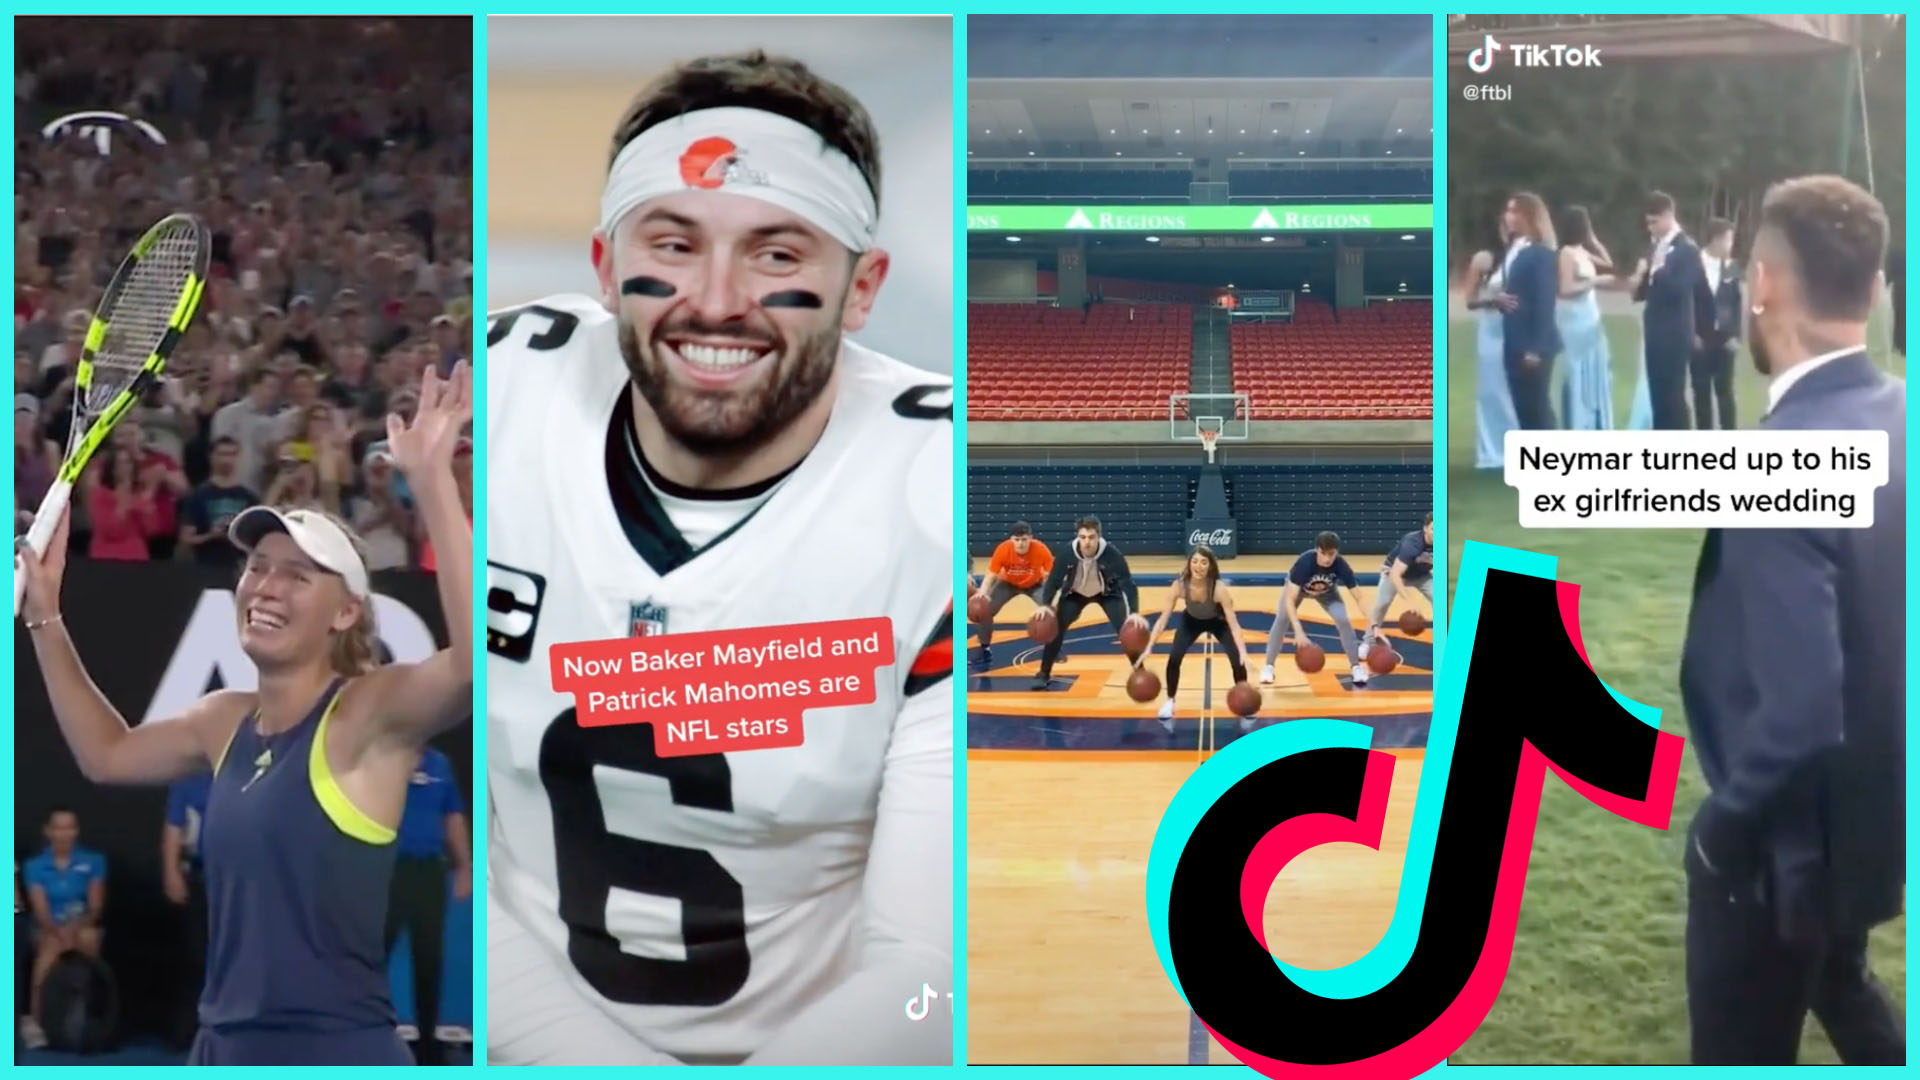 UFC, Euro 2020, Manchester United, all aboard! A look at how the sports world is embracing TikTok